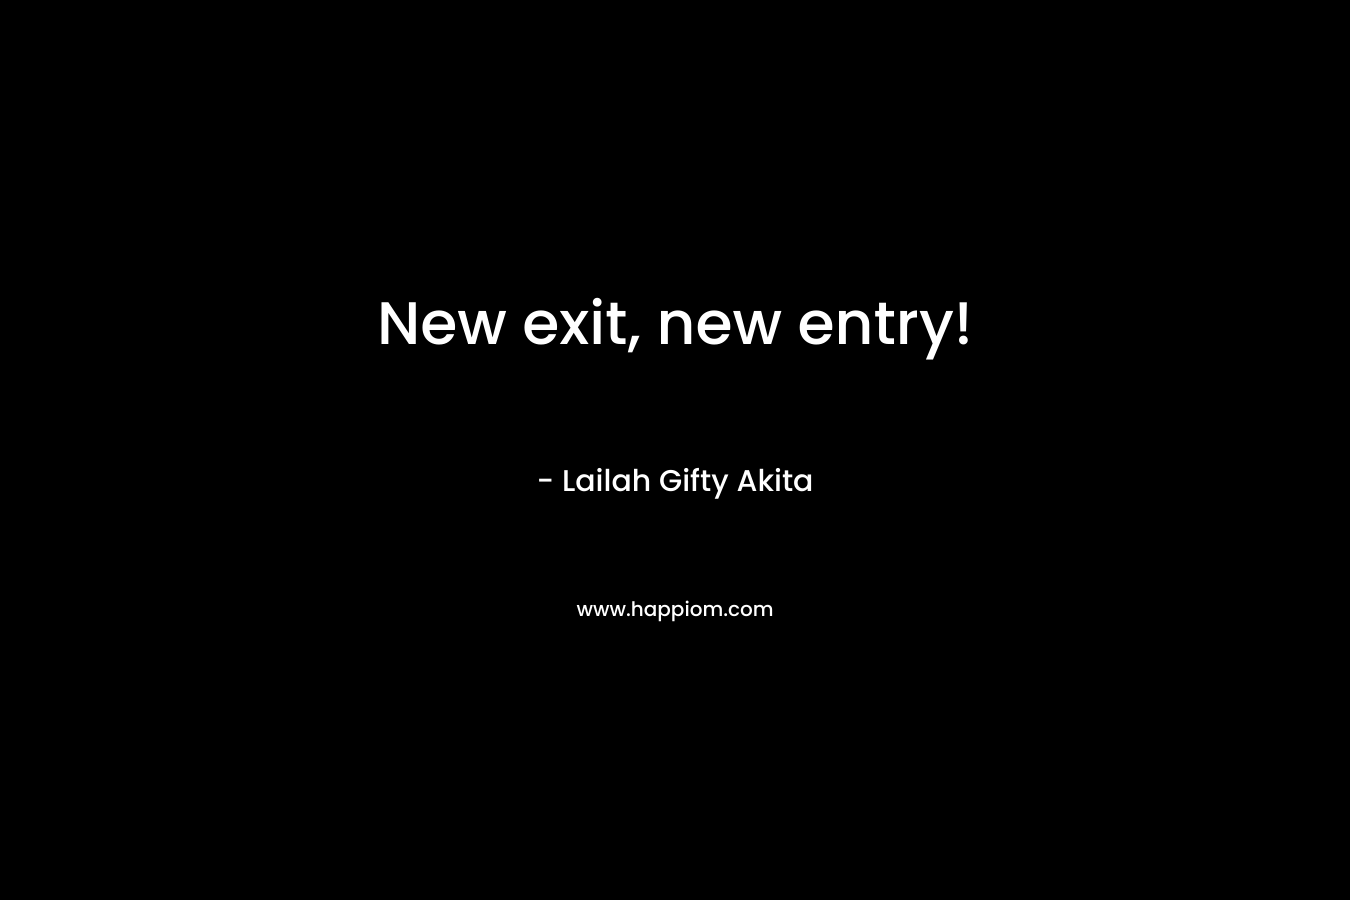 New exit, new entry!